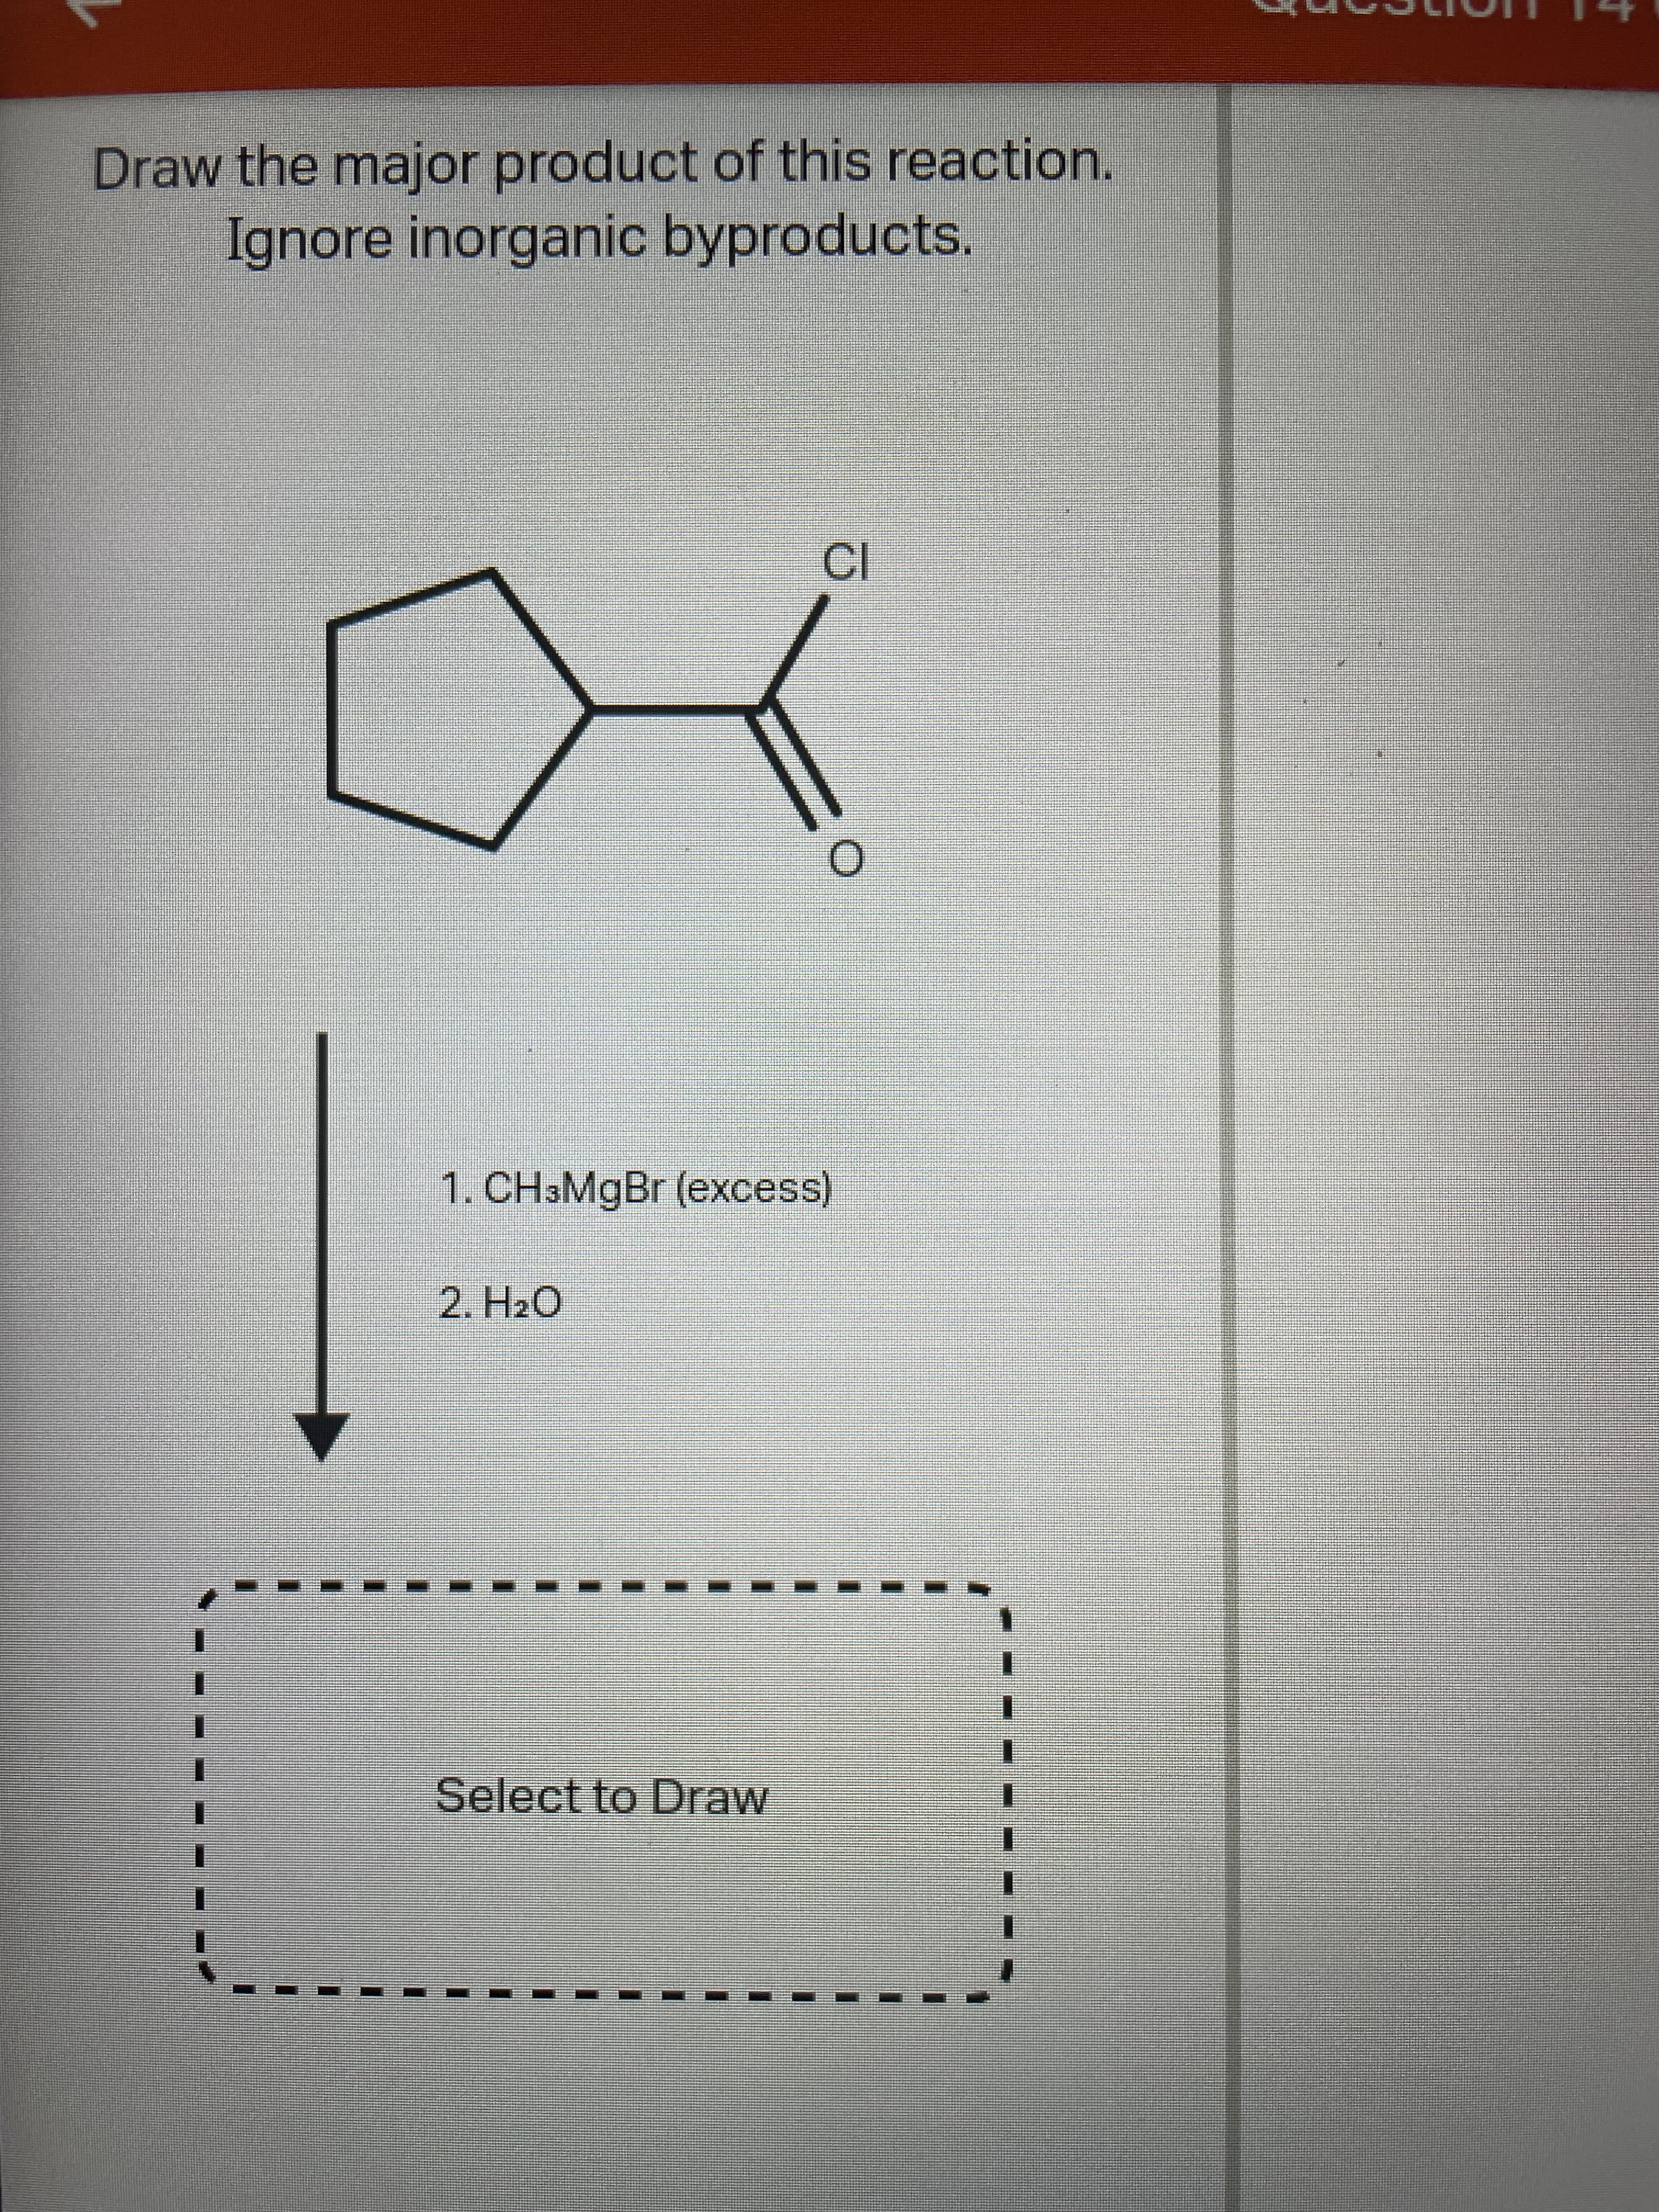 Draw the major product of this reaction.
Ignore inorganic byproducts.
CI
1. CH3MGB (excess)
2. H2O
Select to Draw
